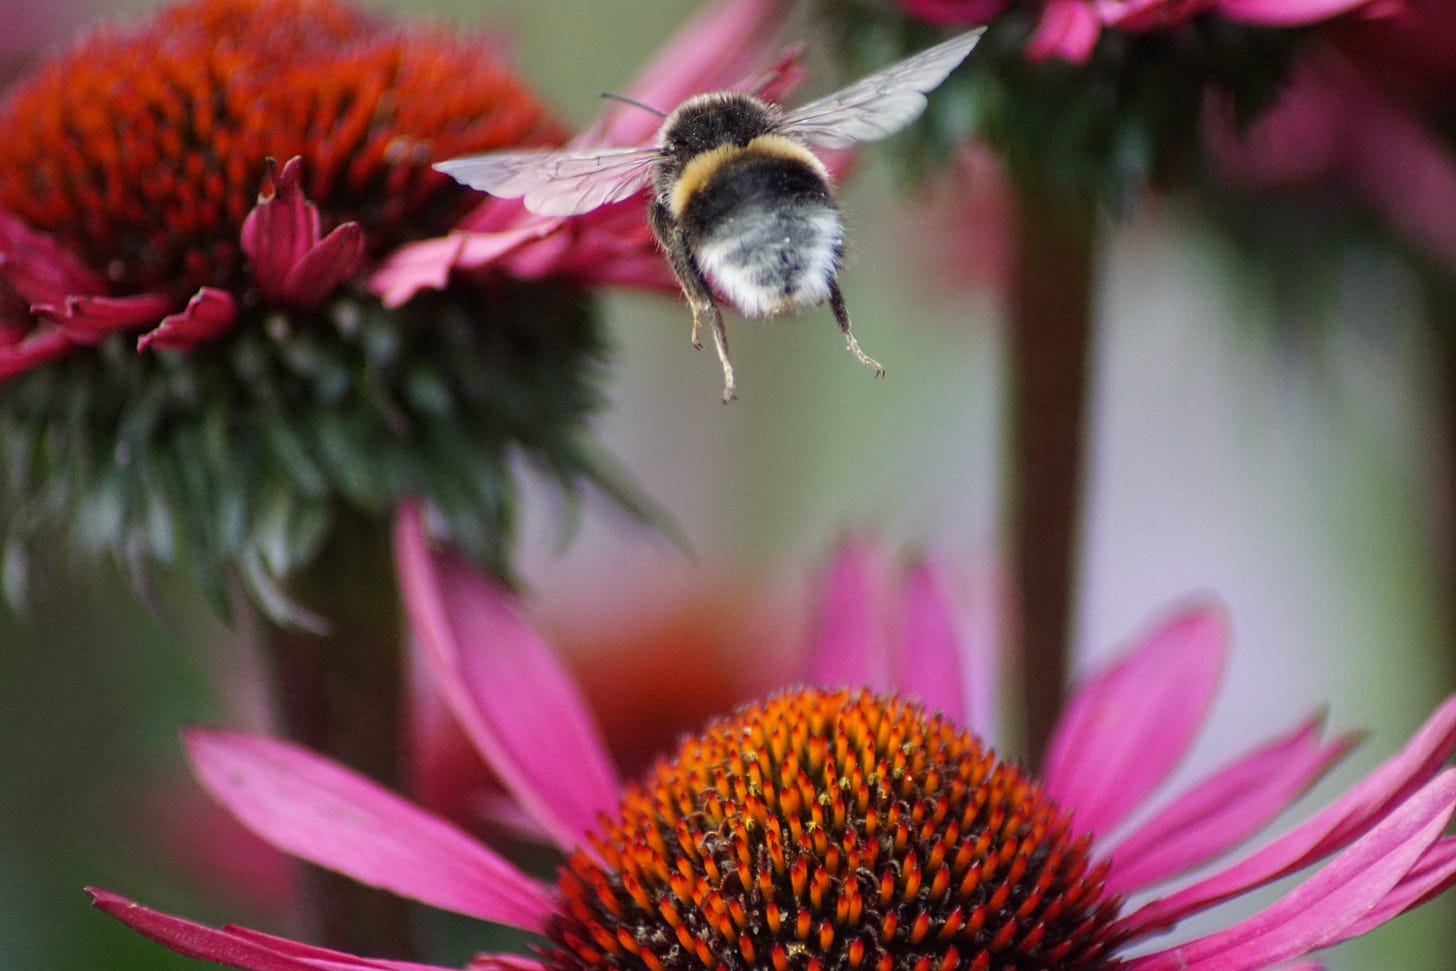 A bee, wings clearly visible as it takes flight, flying toward a pink coneflower